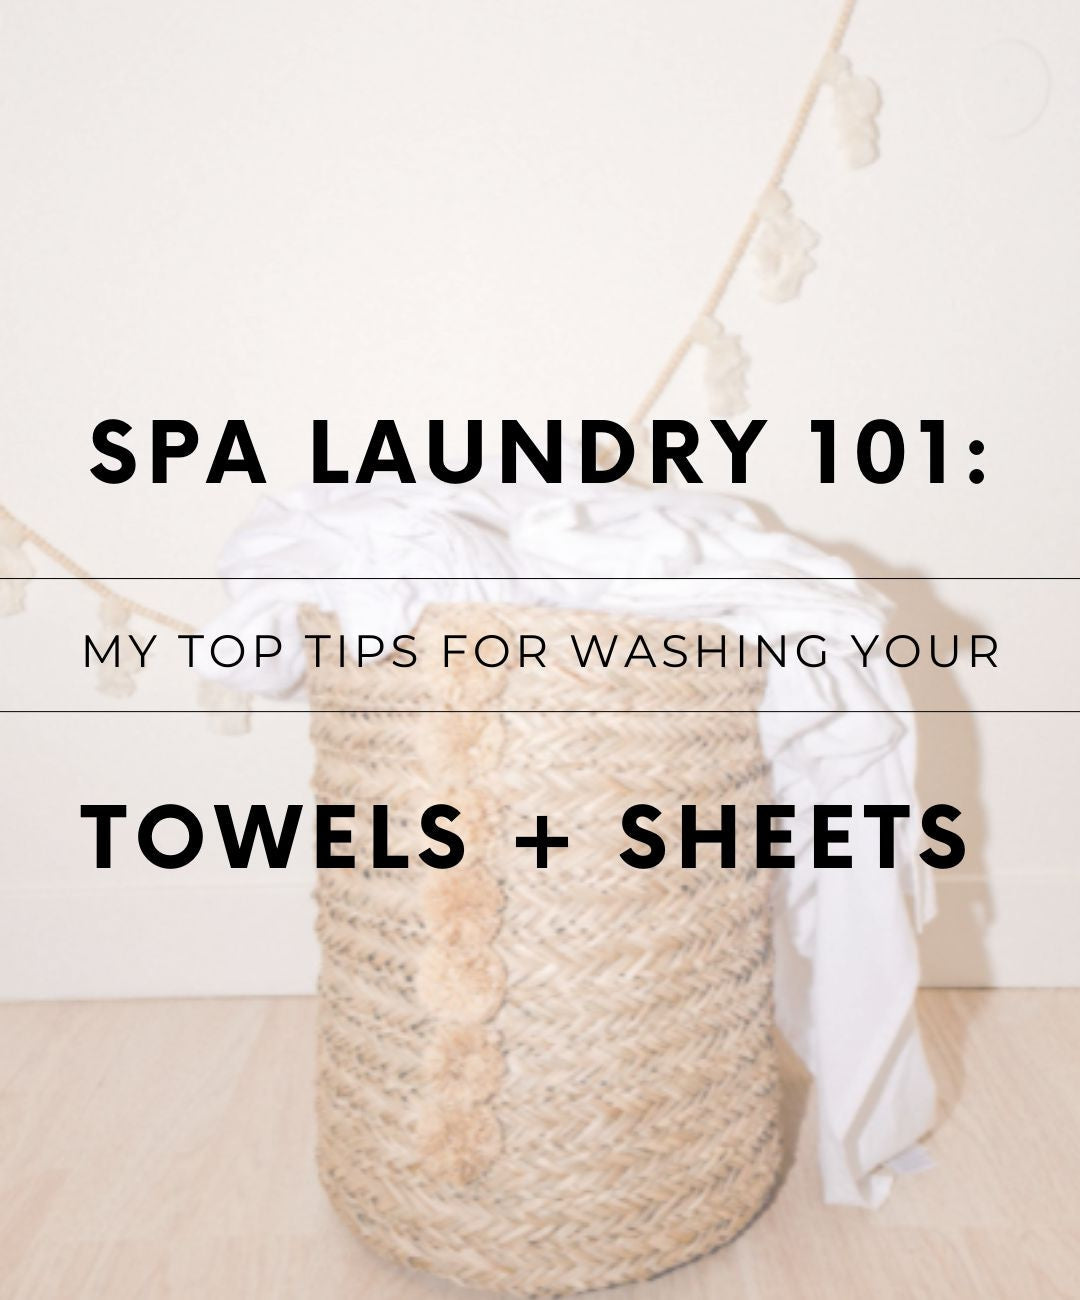 Spa Laundry 101: My Top Tips For Washing Your Towels + Sheets